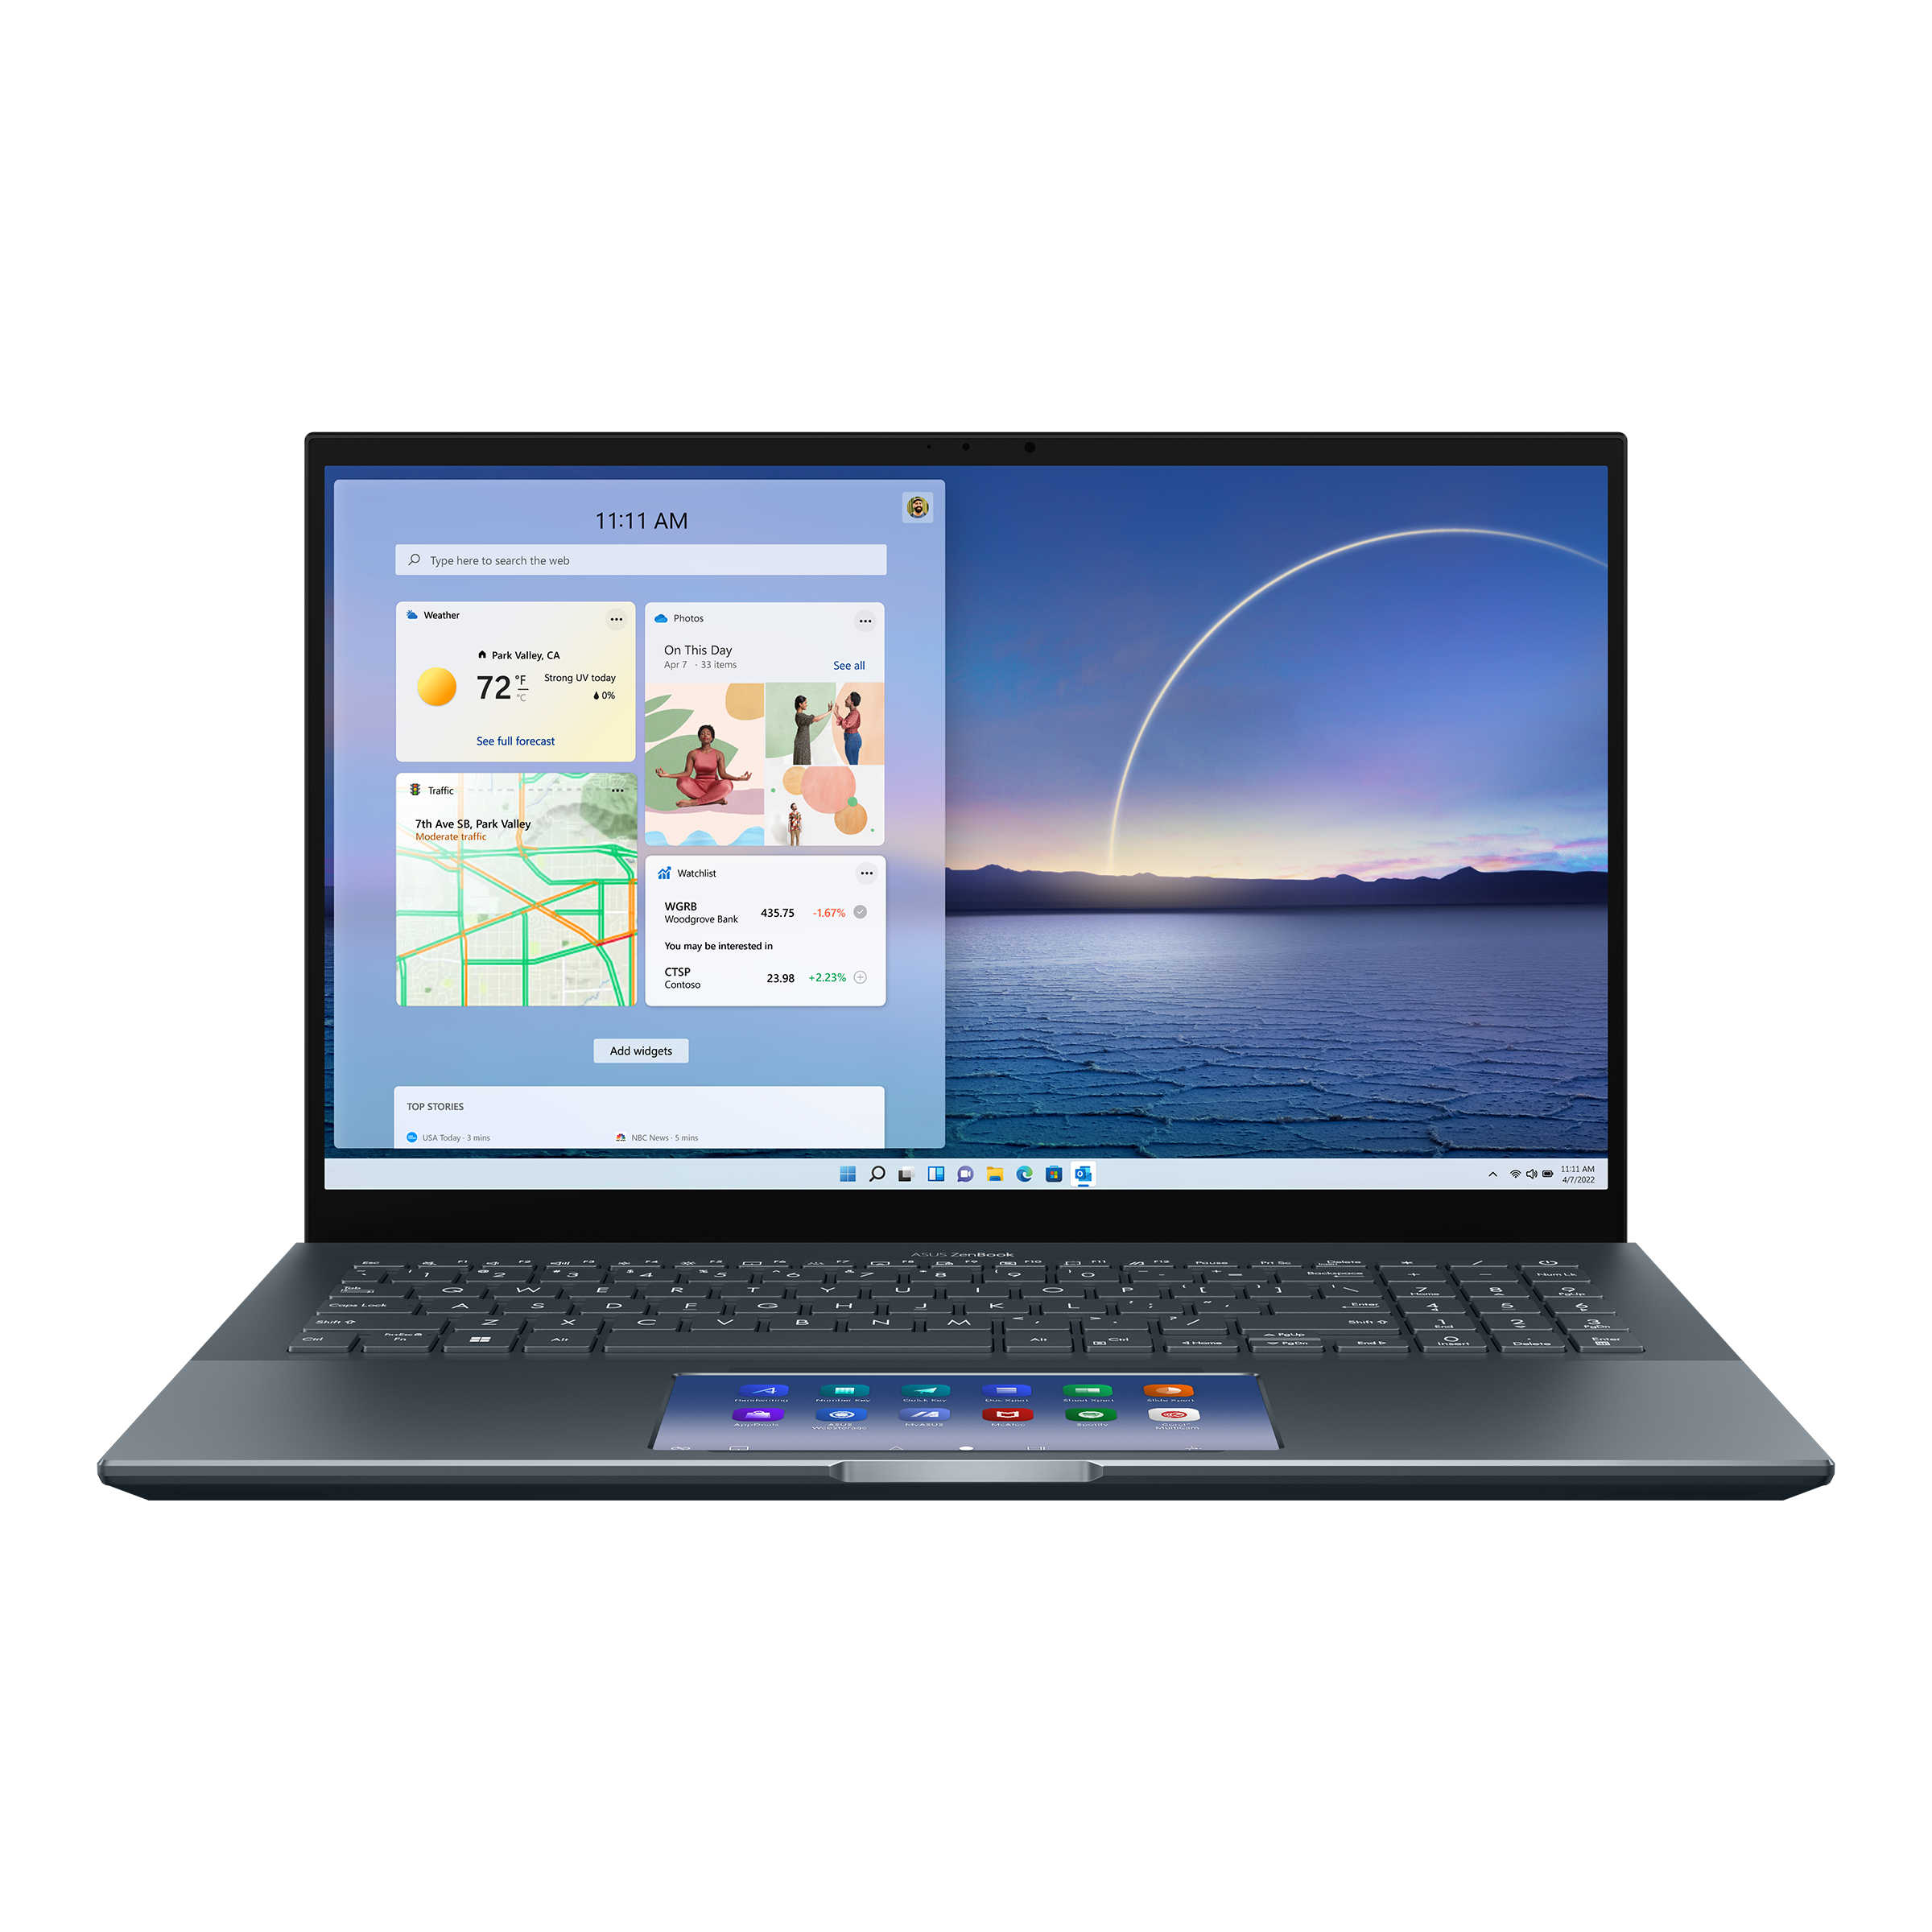 Zenbook Pro 15 UX535｜Laptops For Home｜ASUS USA